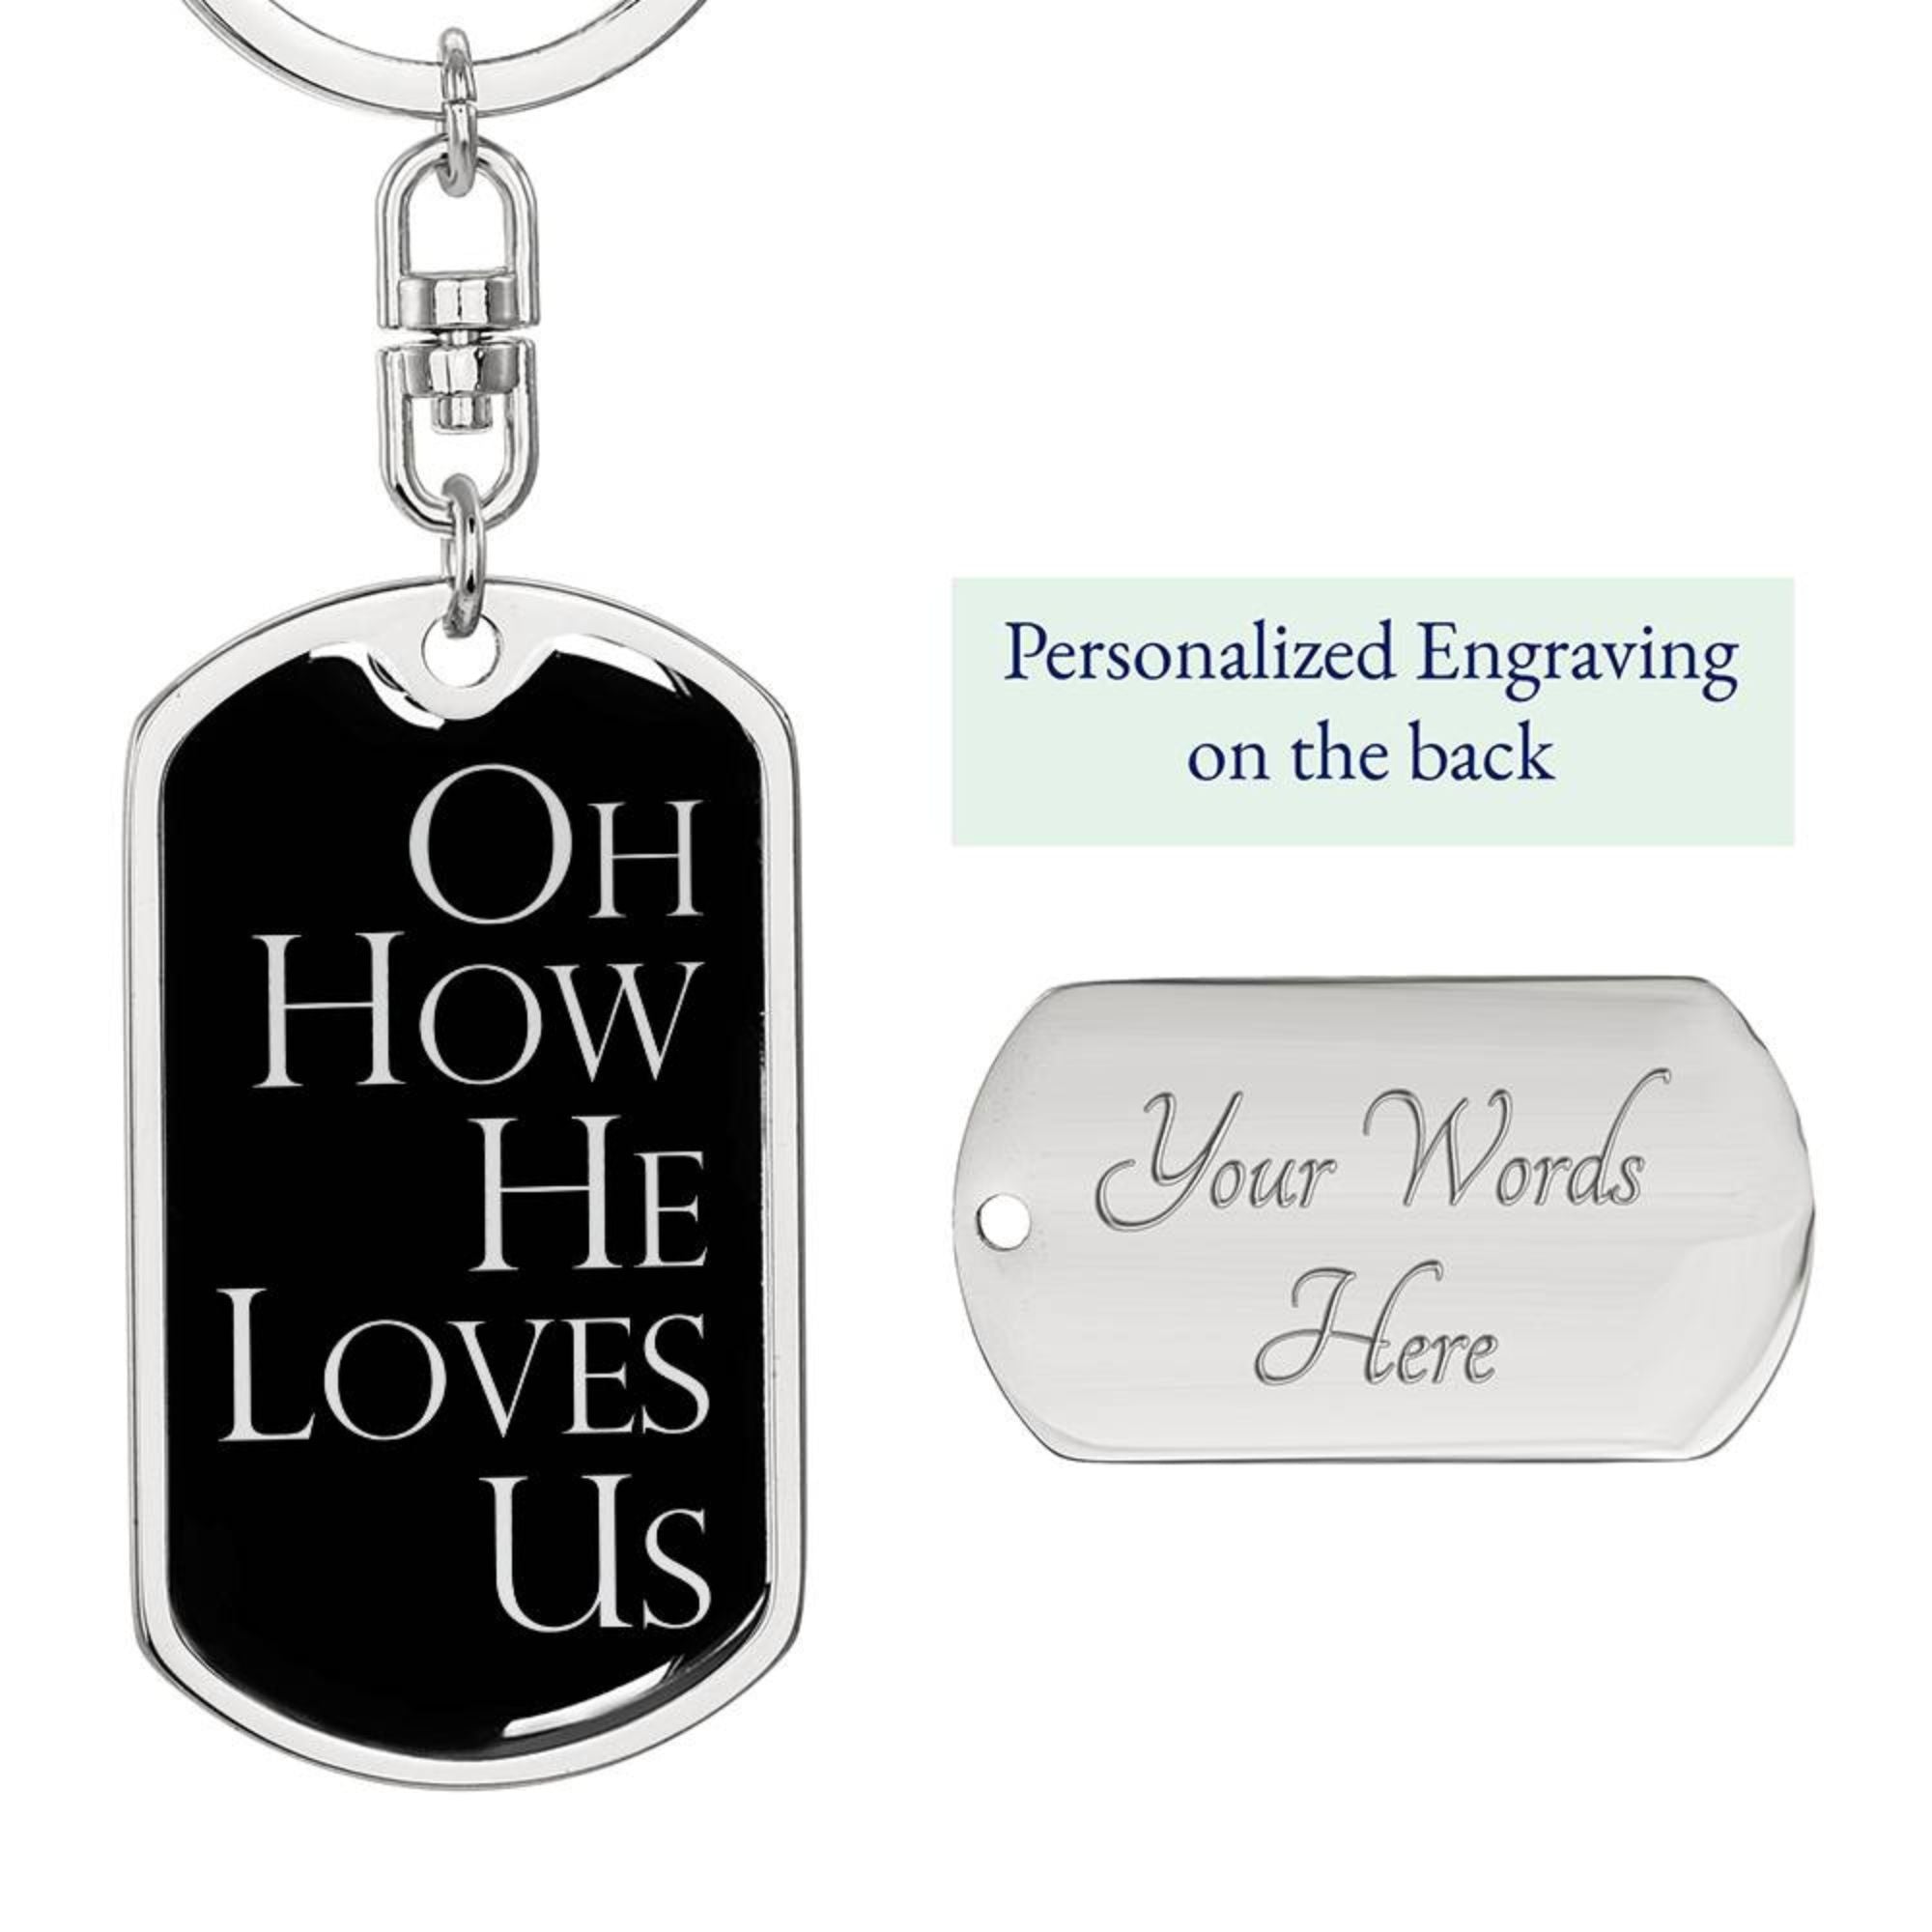 Oh How He Loves Us - Silver Dog Tag with Swivel Keychain Engraving: Yes Jesus Passion Apparel